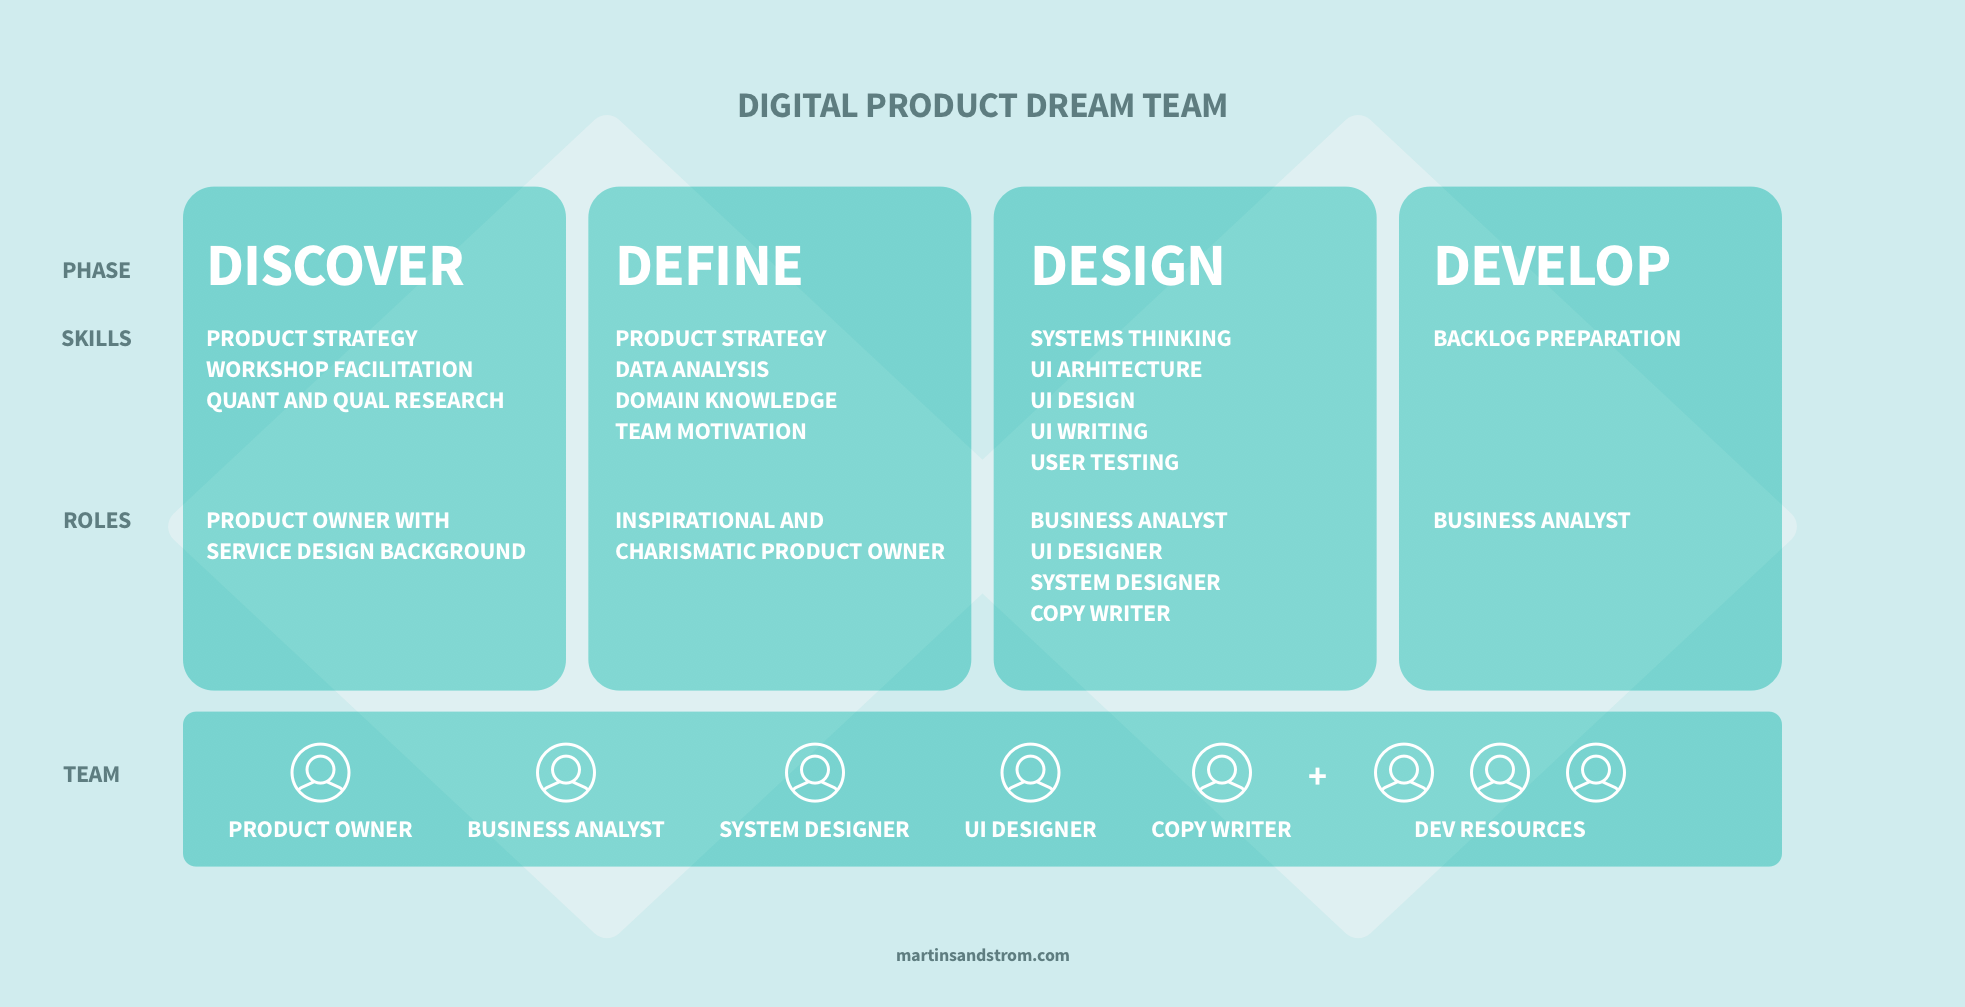 Diagram showing the ideal digital product team structure and roles.